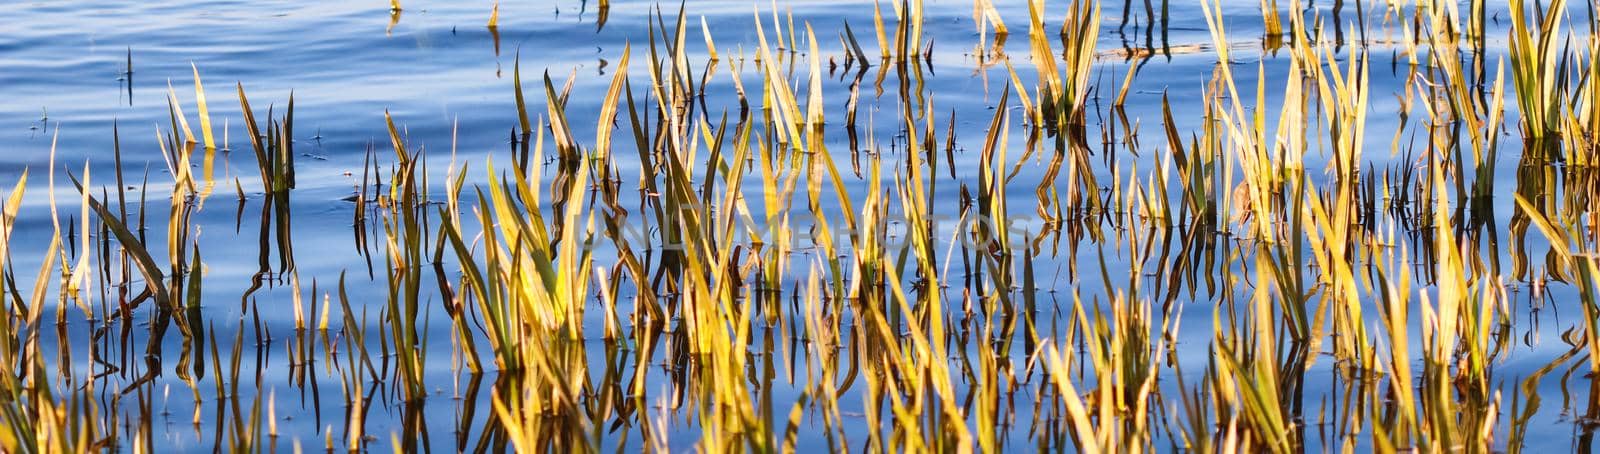 Reeds in the blue water of a lake at sunset